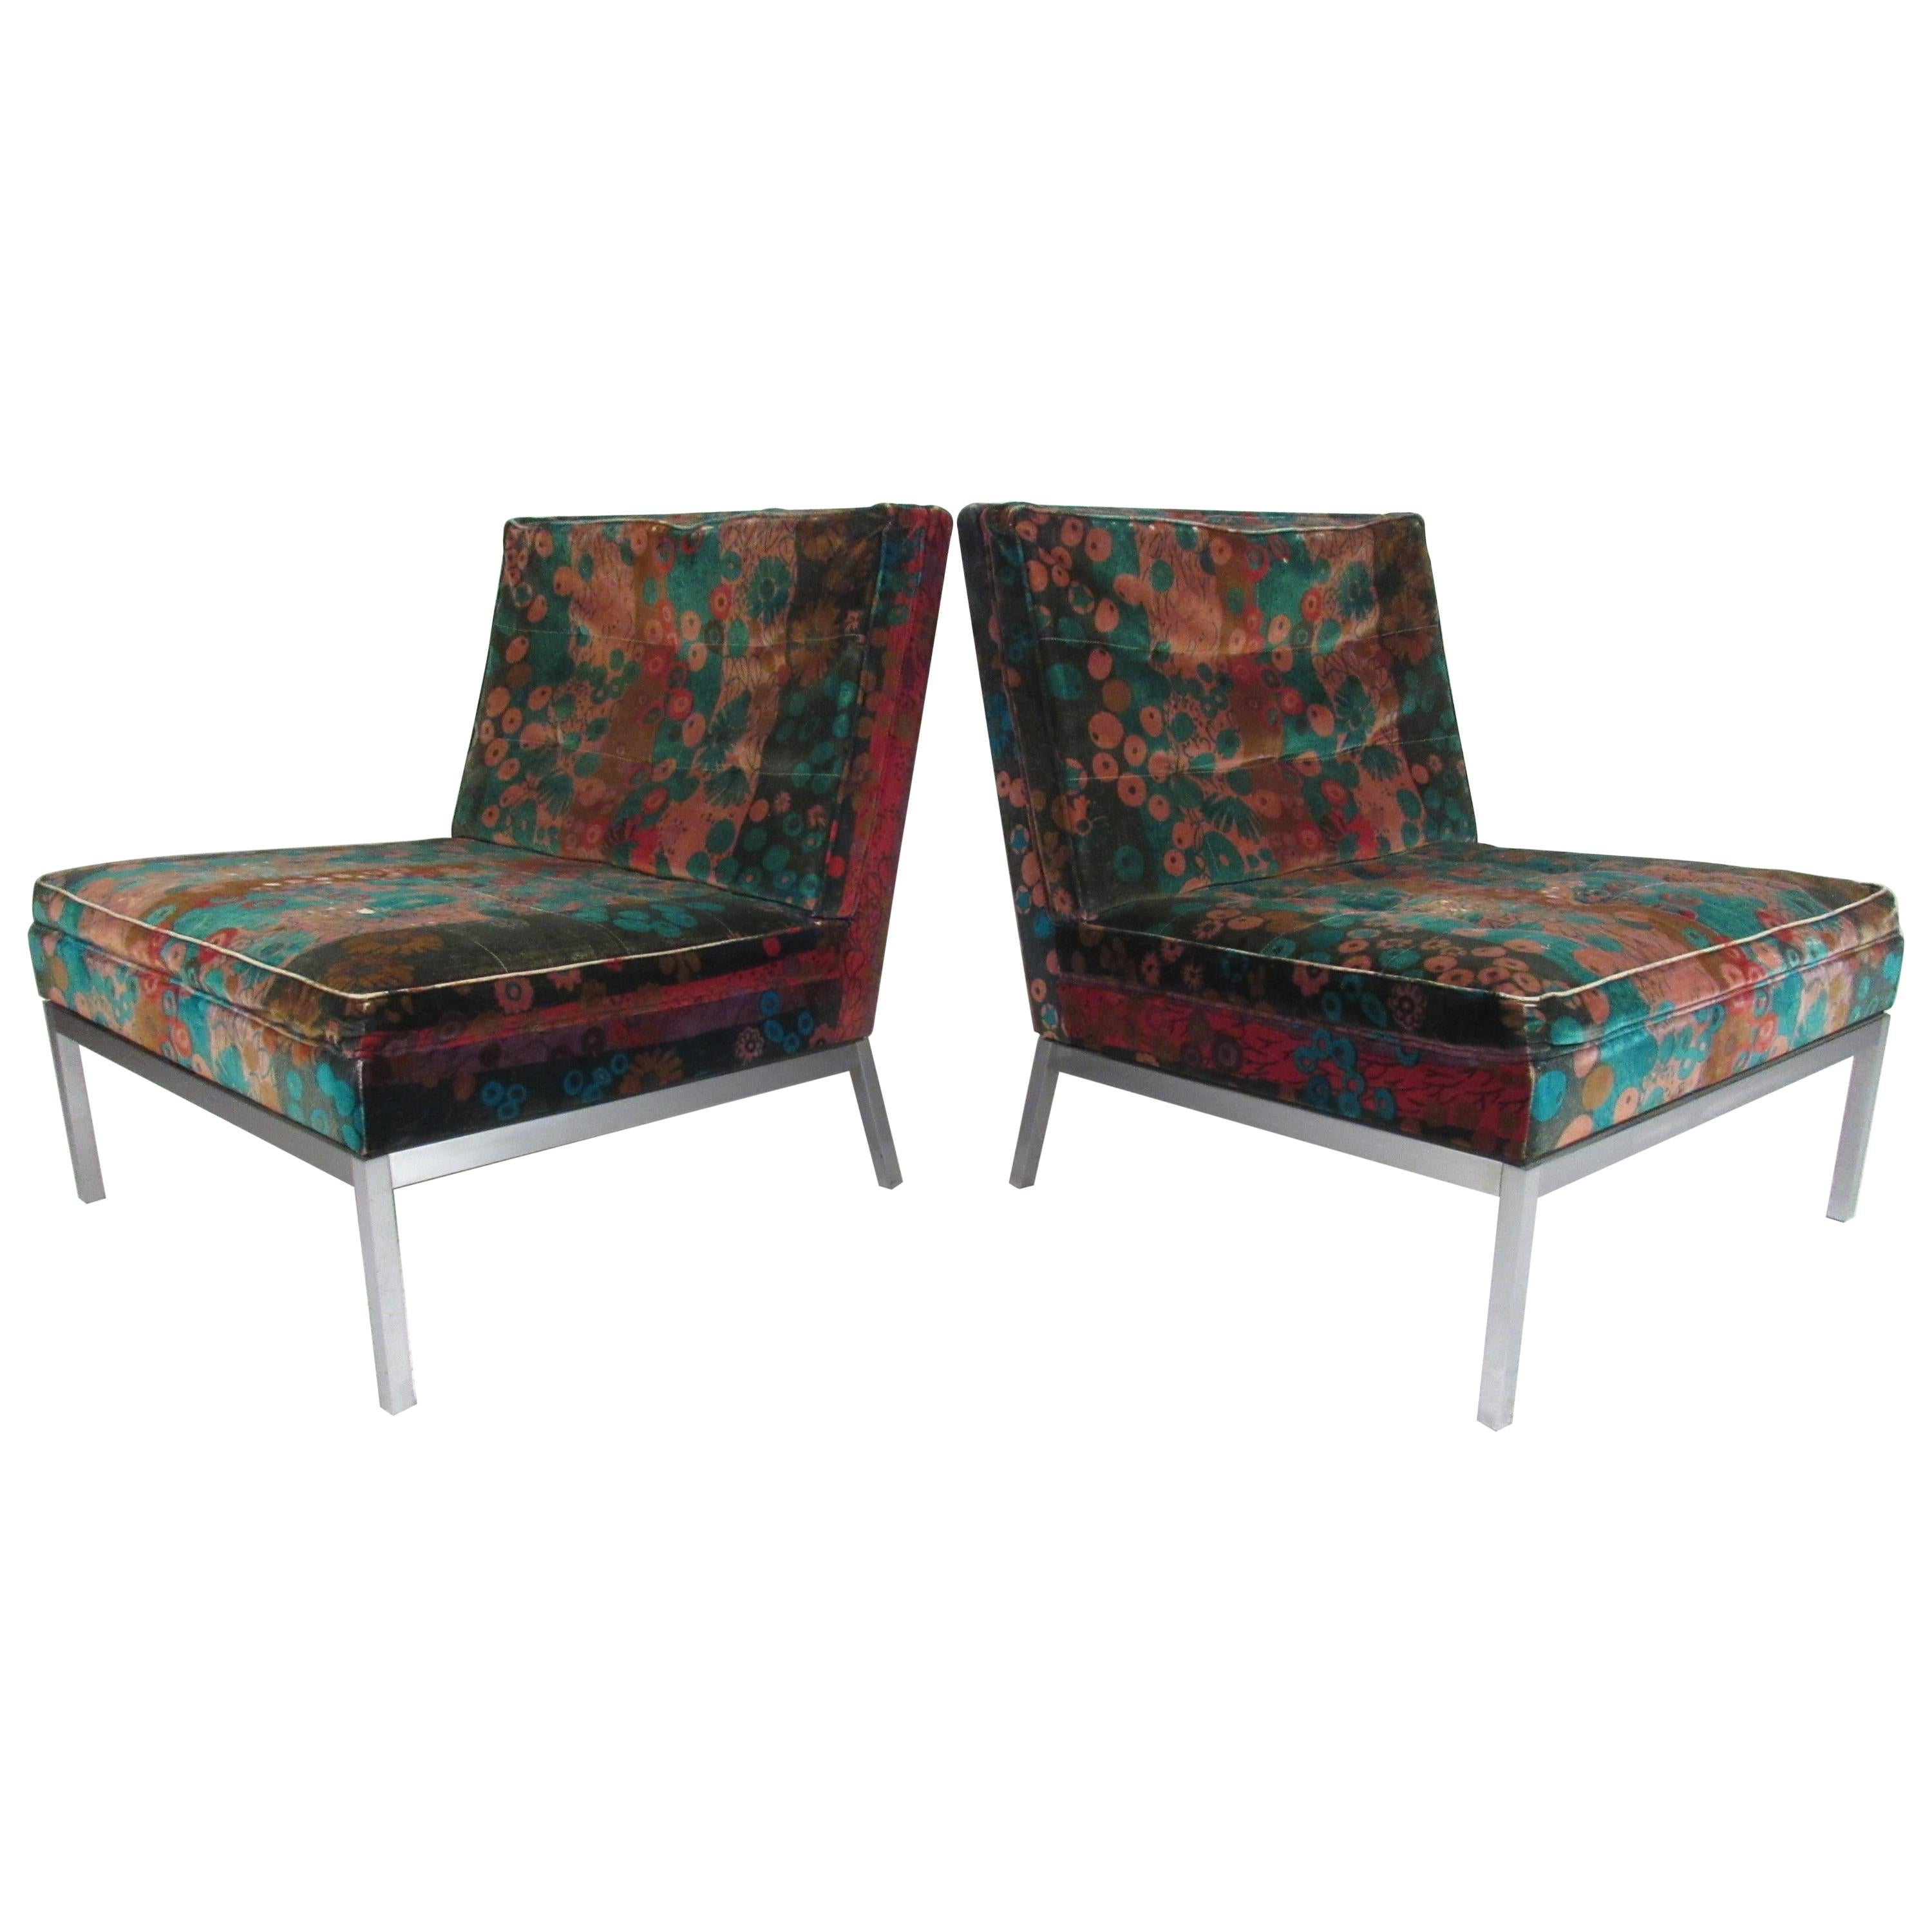 Pair of Midcentury Slipper Lounge Chairs by Knoll Associates Inc